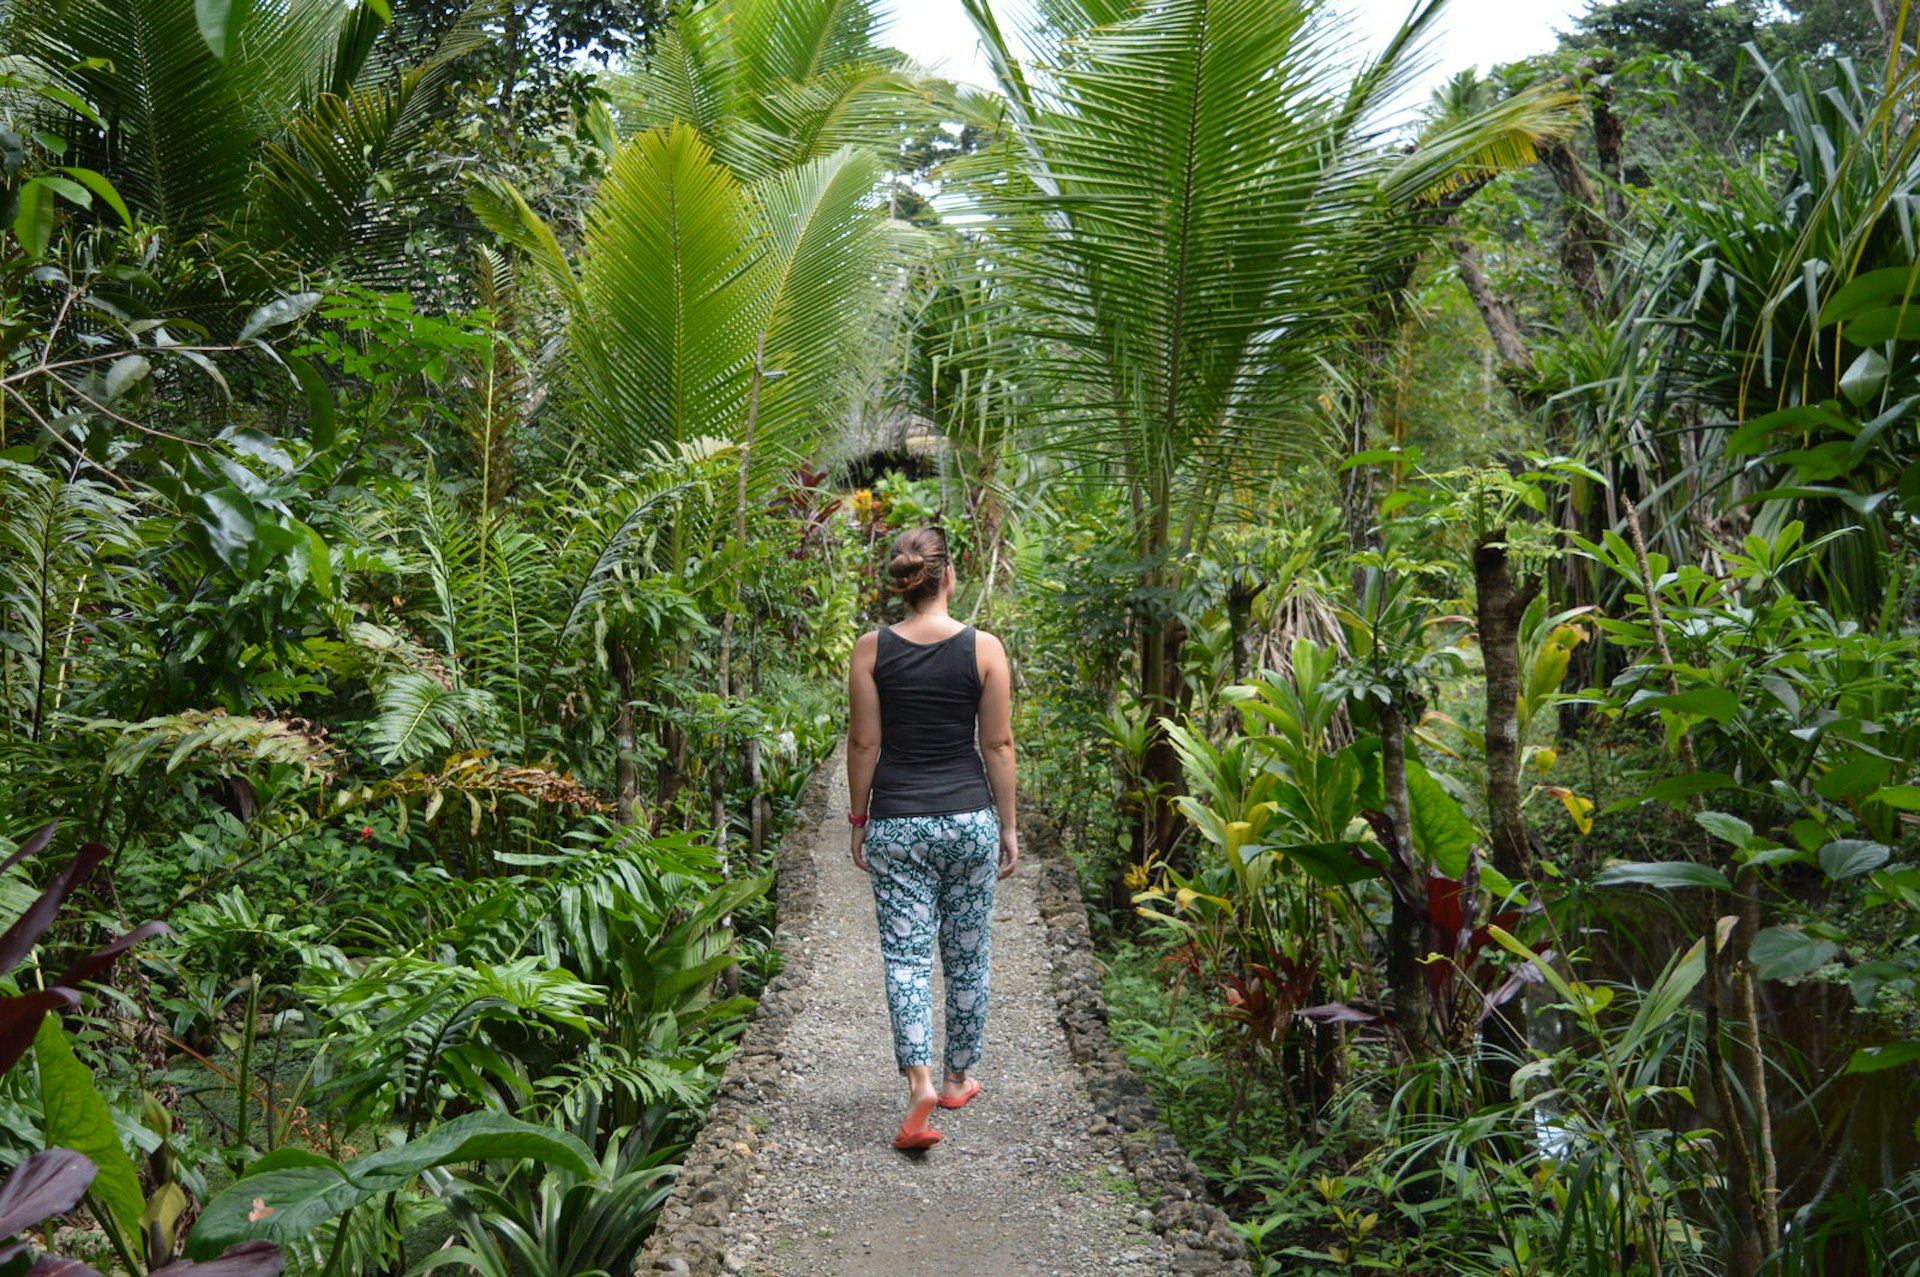 Emma Sparks walks along a path in Rio Dulce surrounded by green plants and trees © Emma Sparks / Lonely Planet